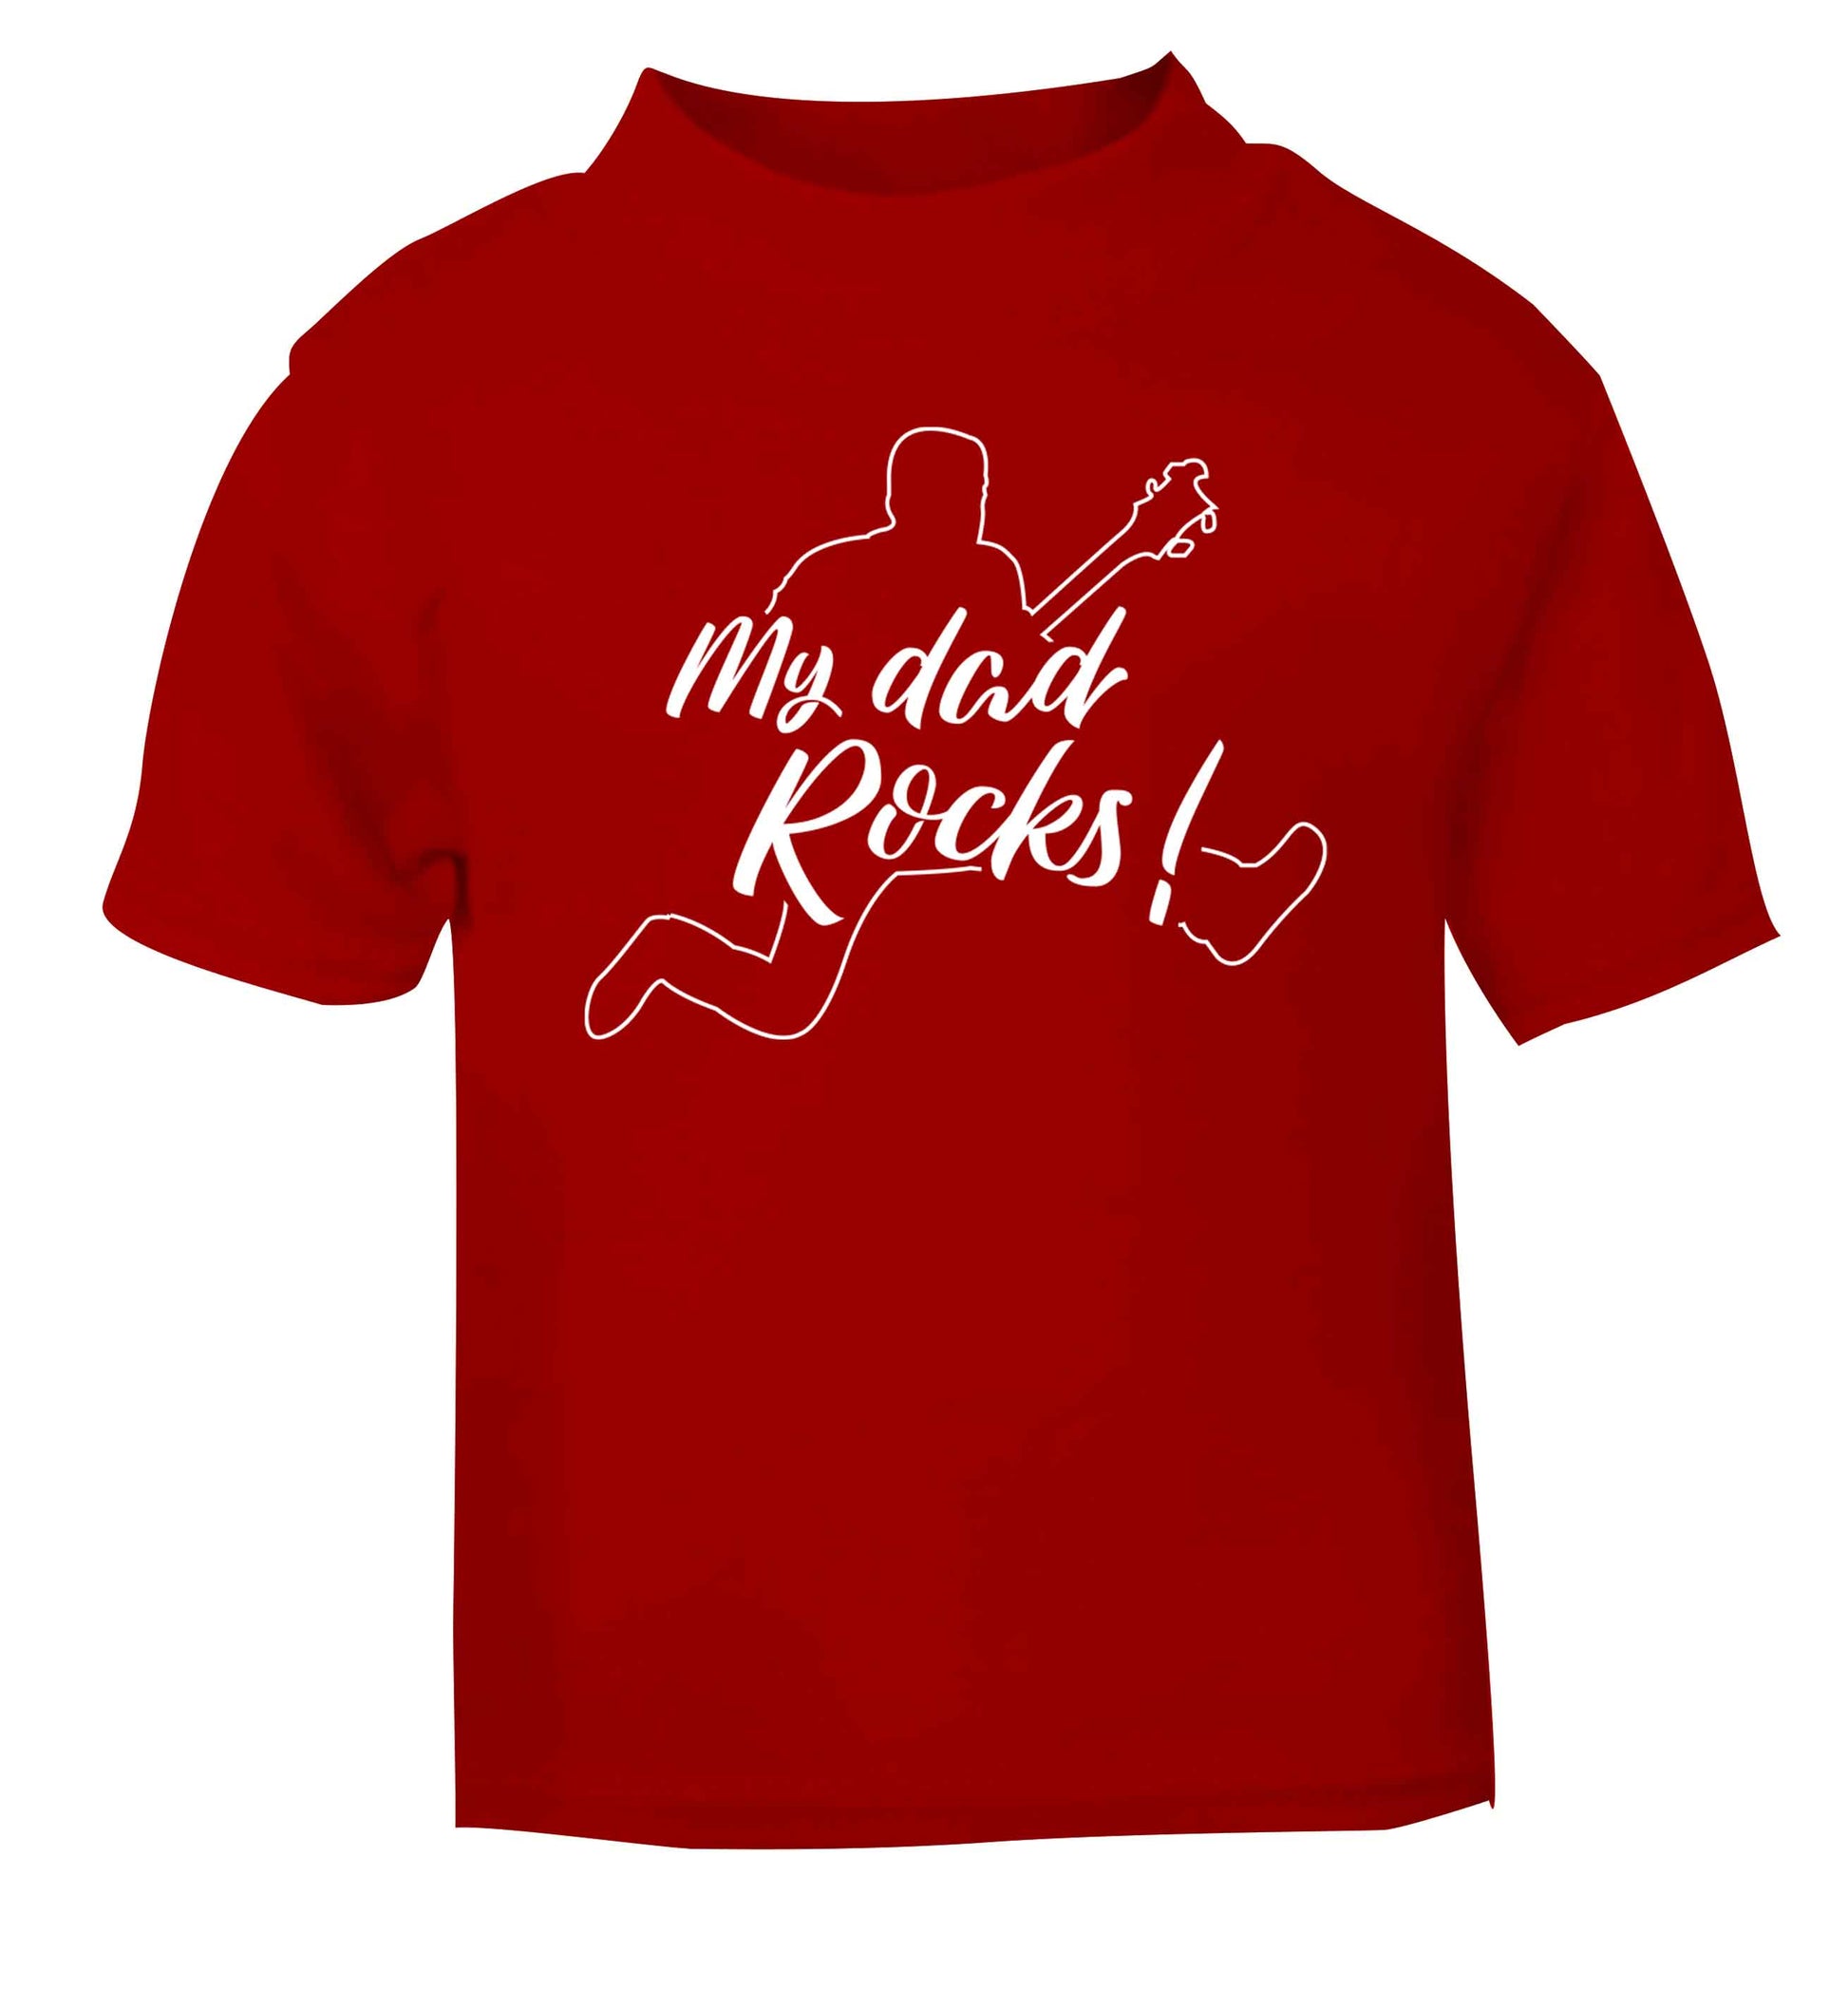 My Dad rocks red baby toddler Tshirt 2 Years